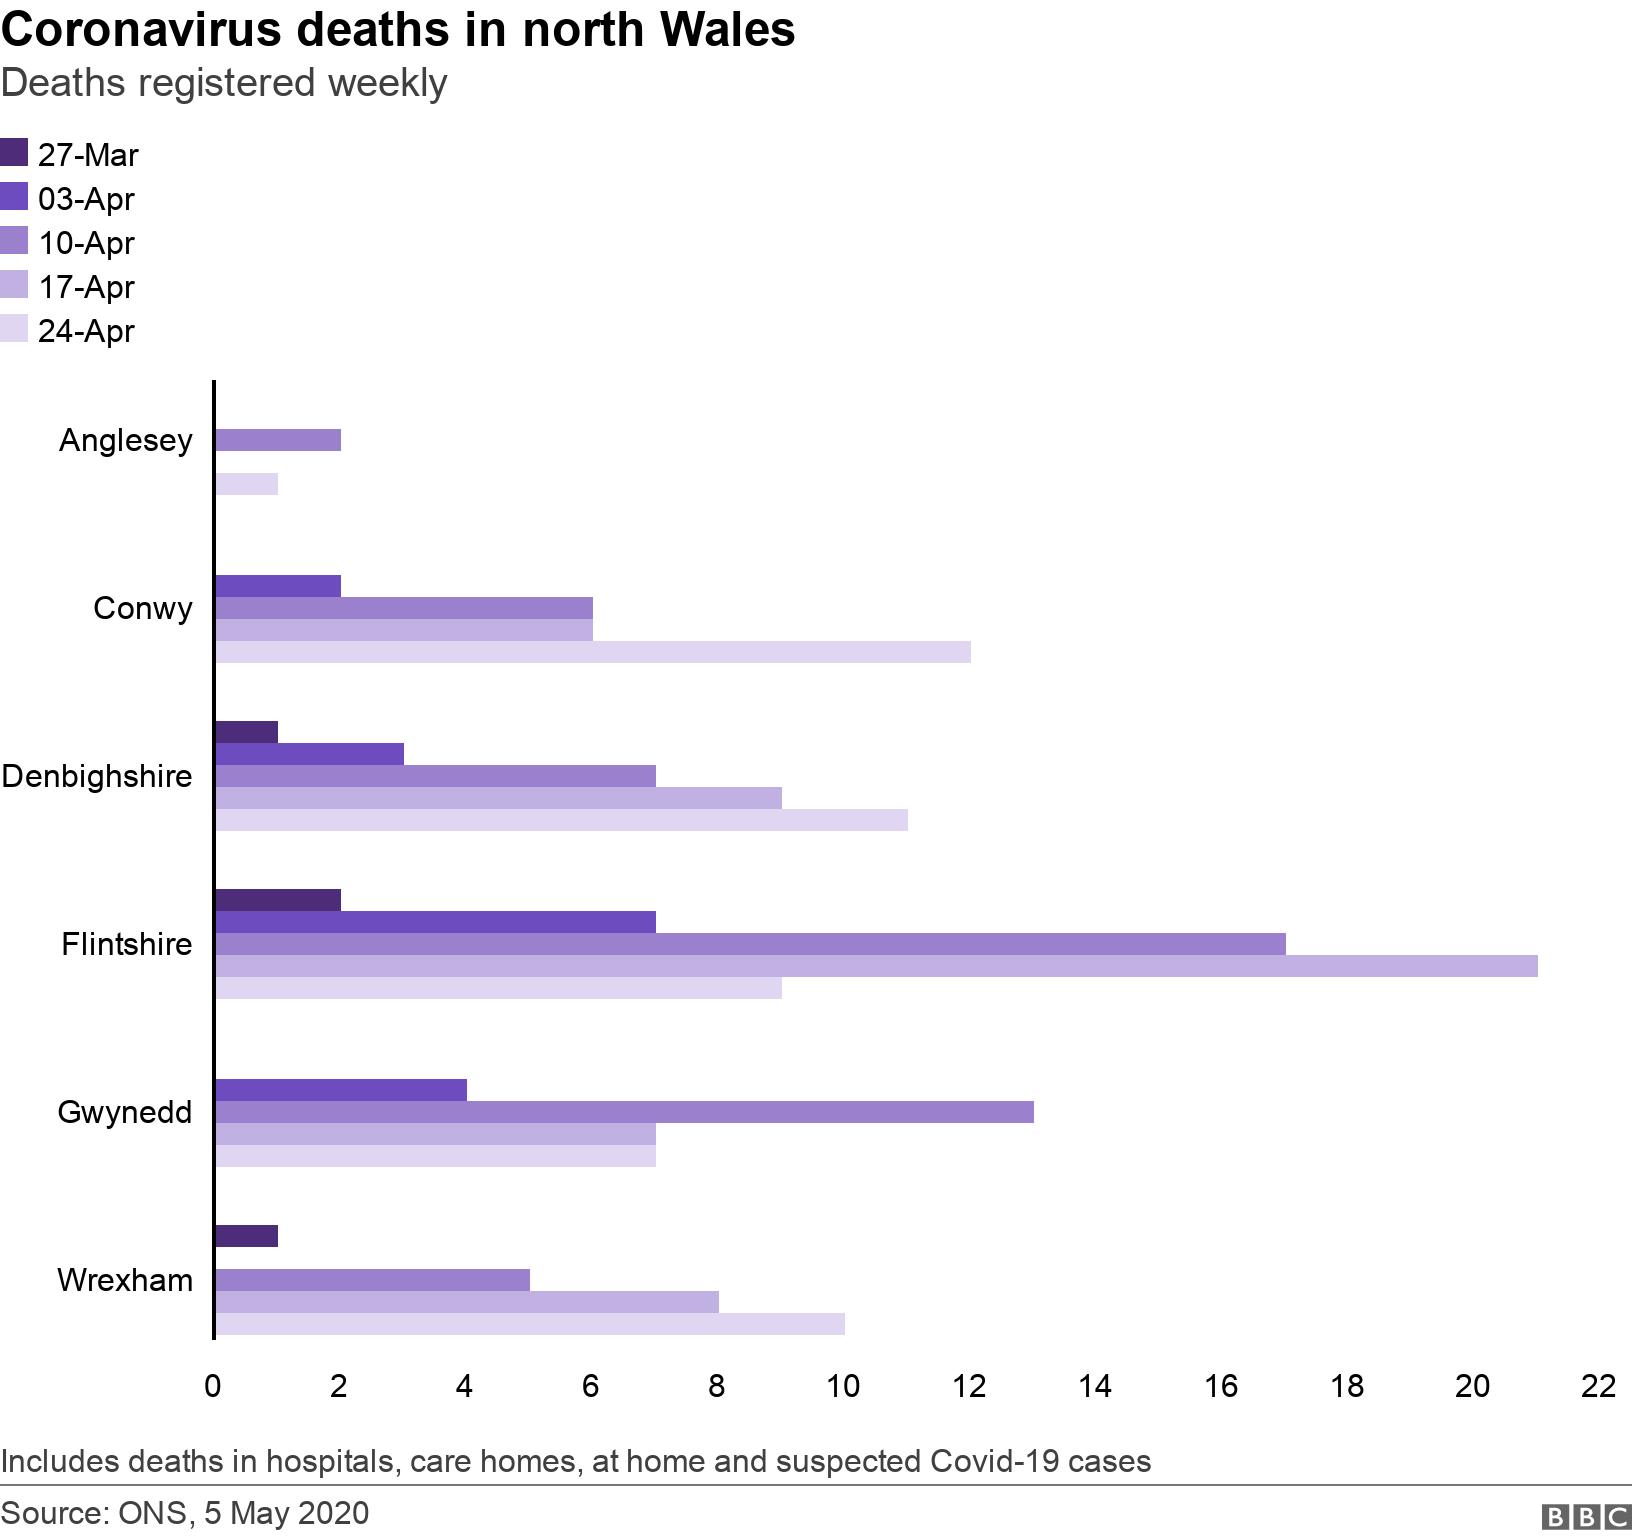 Coronavirus deaths in north Wales. Deaths registered weekly.  Includes deaths in hospitals, care homes, at home and suspected Covid-19 cases.